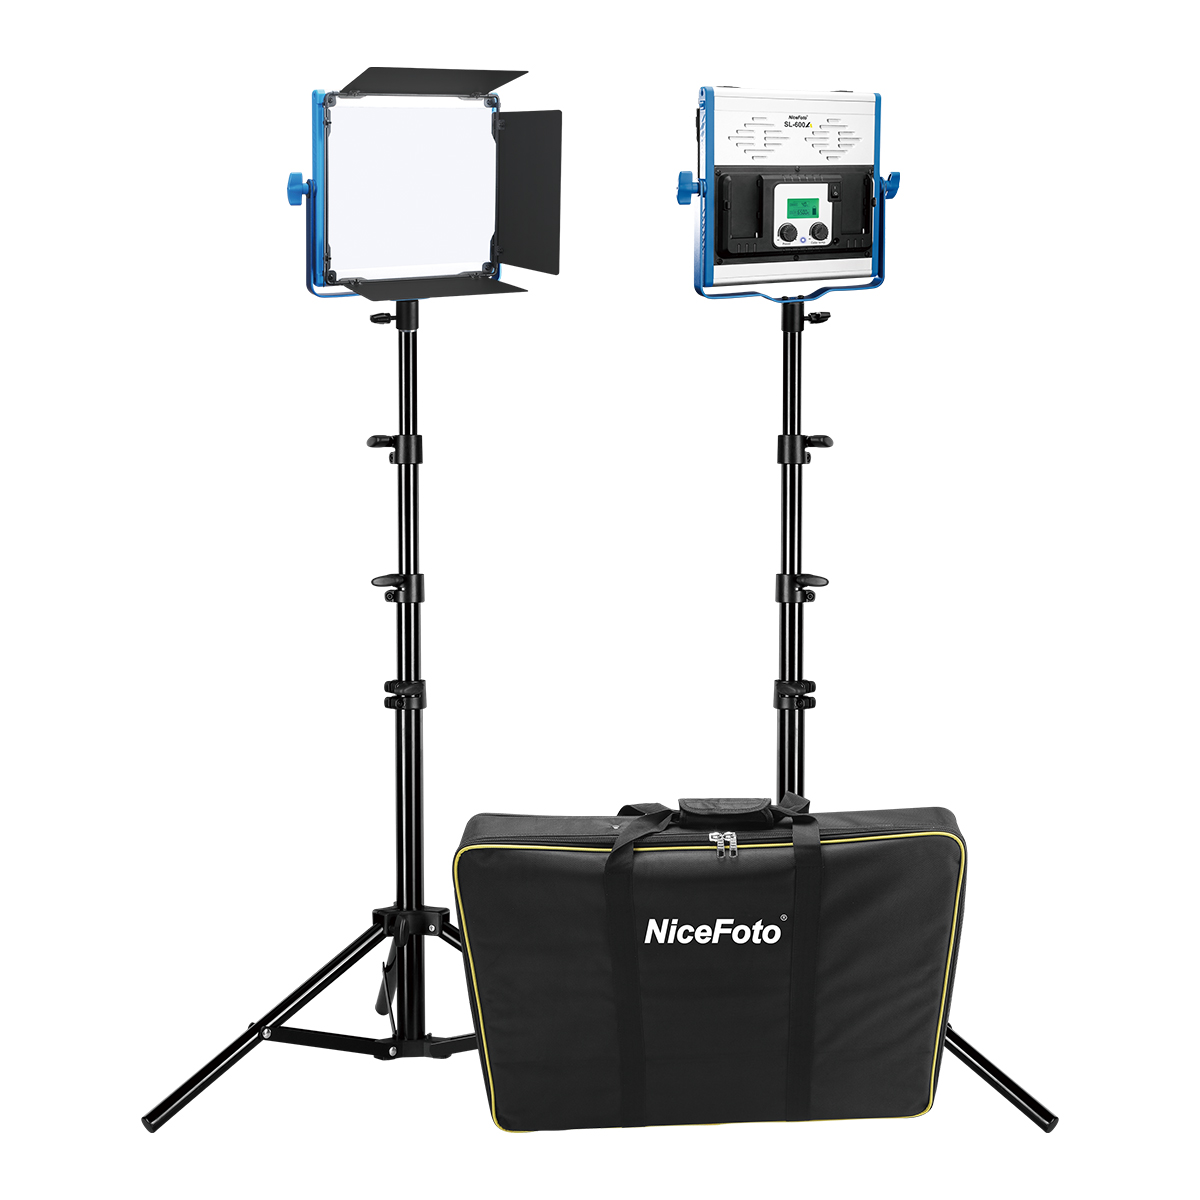 ColorGlow Pro 600 - Professional LED video light with app control and Tripod